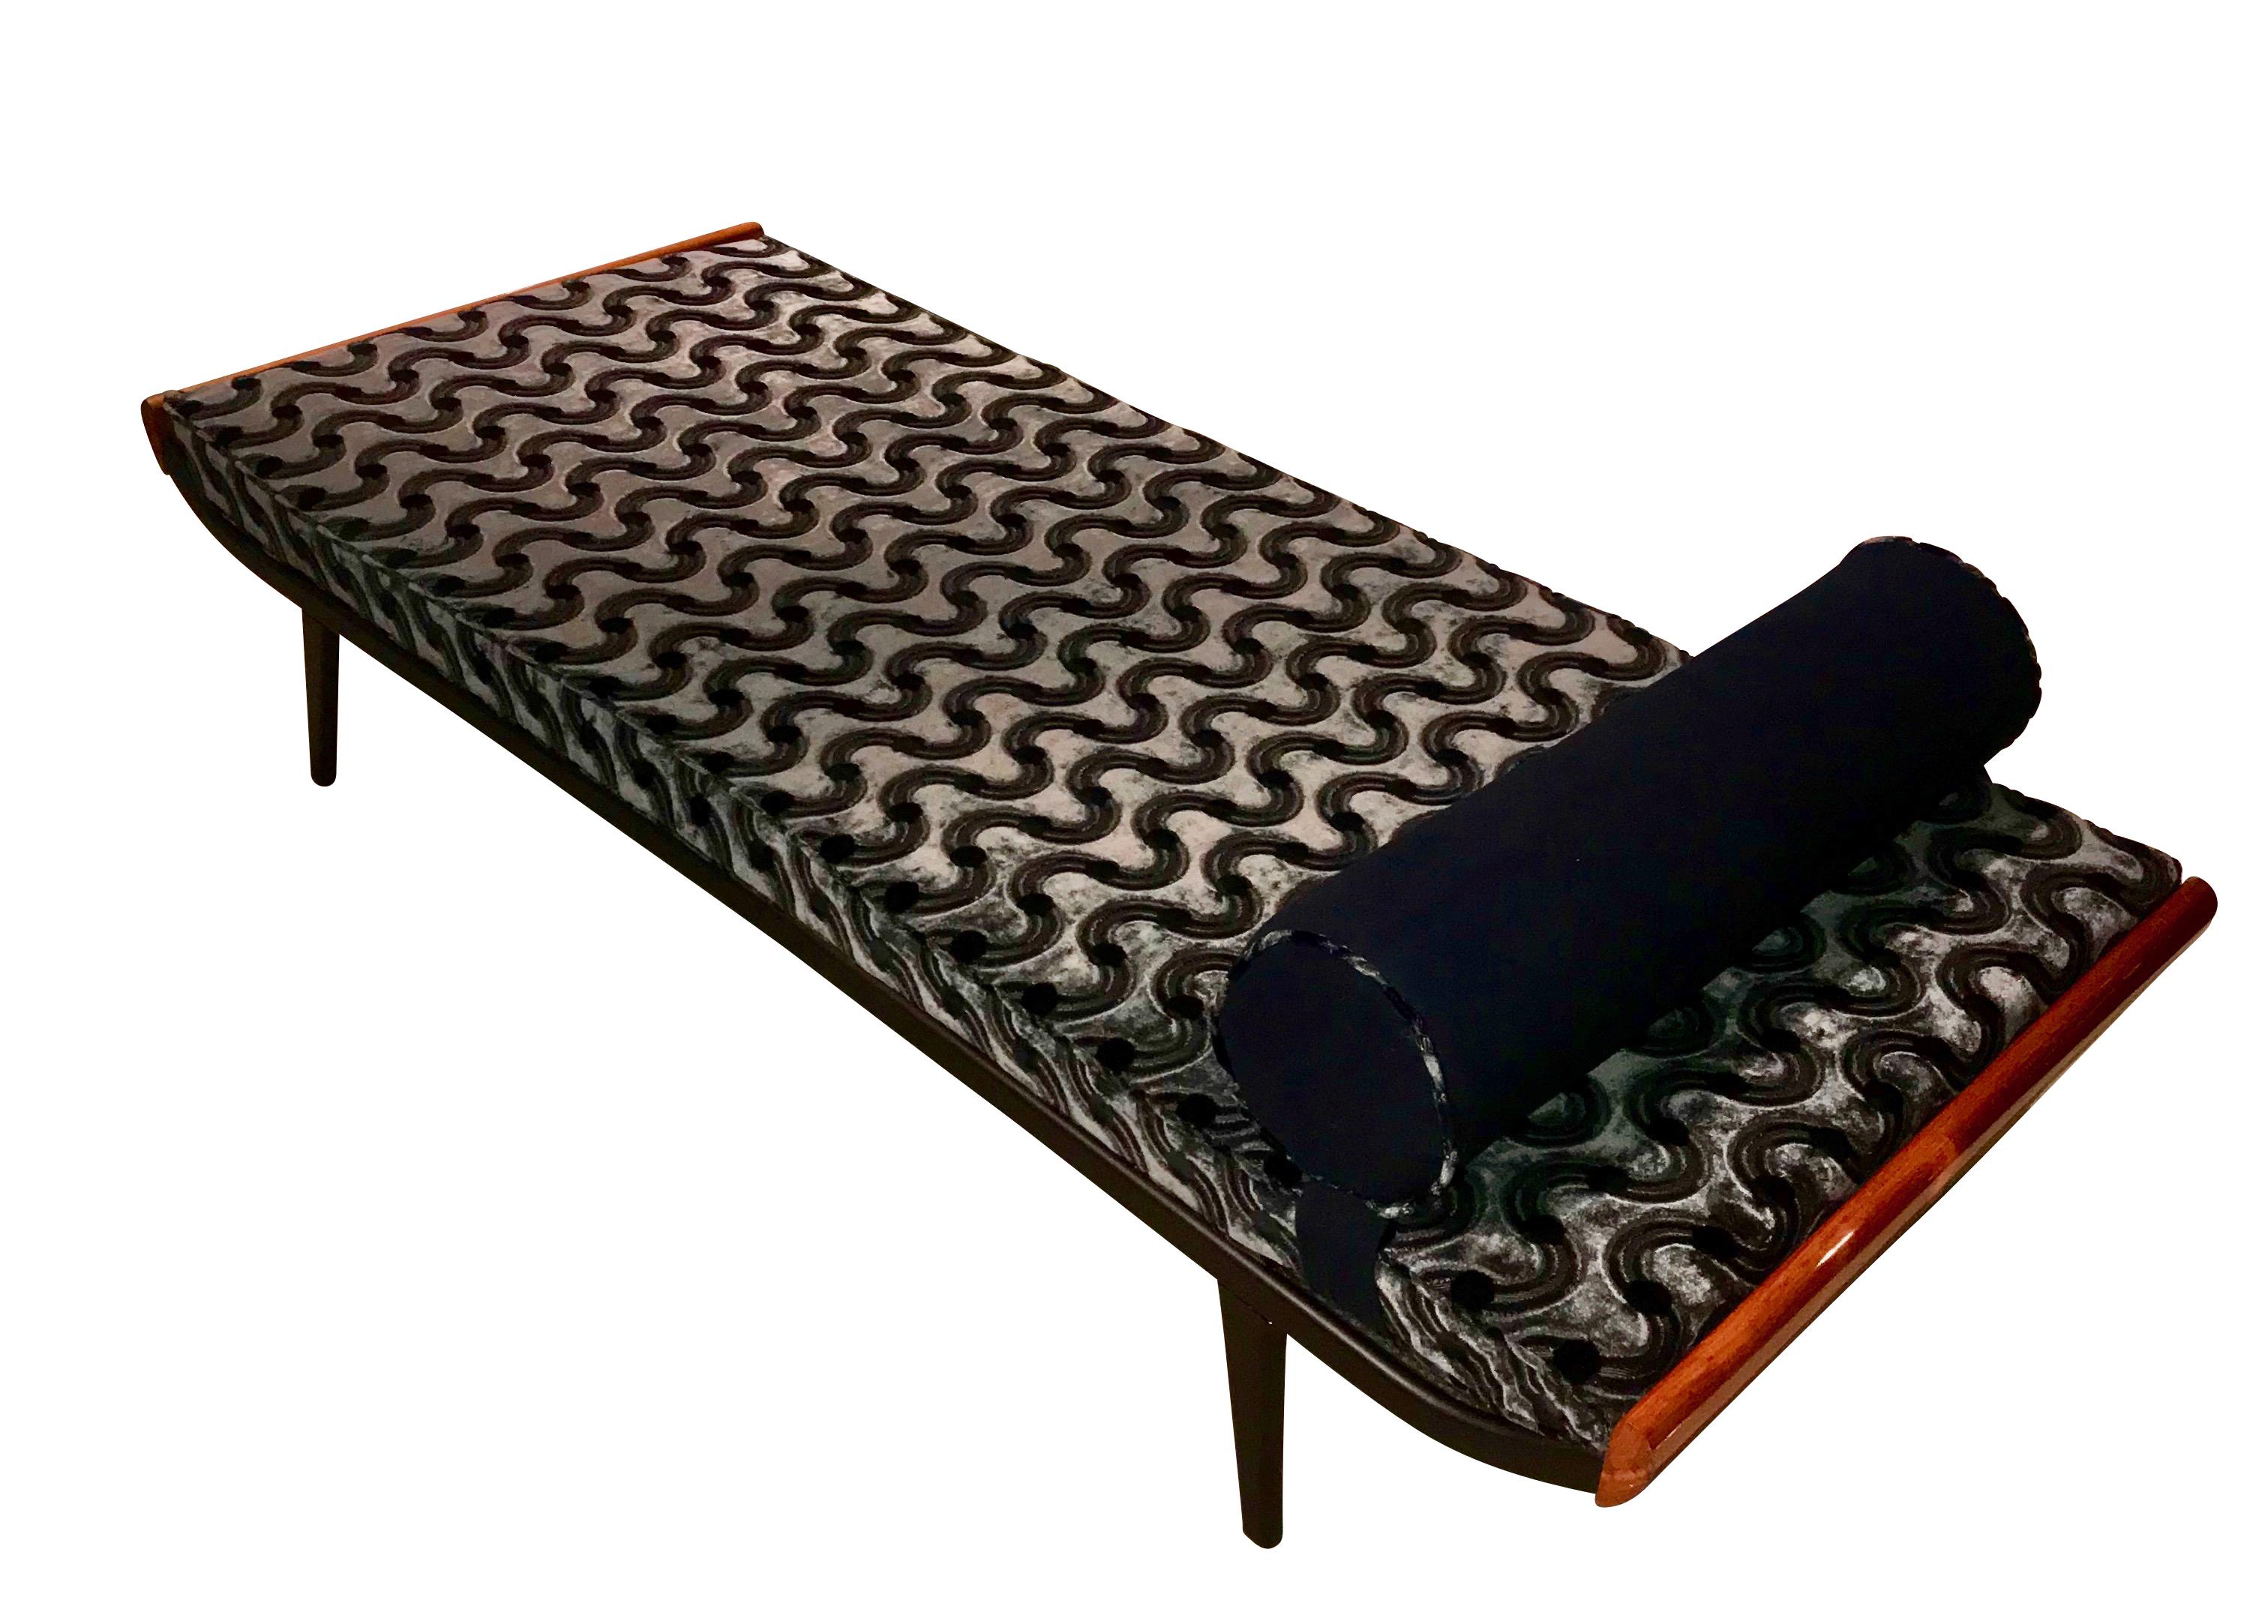 Cleopatra Daybed by Auping, Metal, Teak and New Velvet Upholstery, Netherlands, 1950s

Iconic and comfy Mid-Century Design Daybed / Chaiselongue.
 
The ‘Cleopatra’ daybed has been designed by Dick Cordemeijer for Auping and has been released in